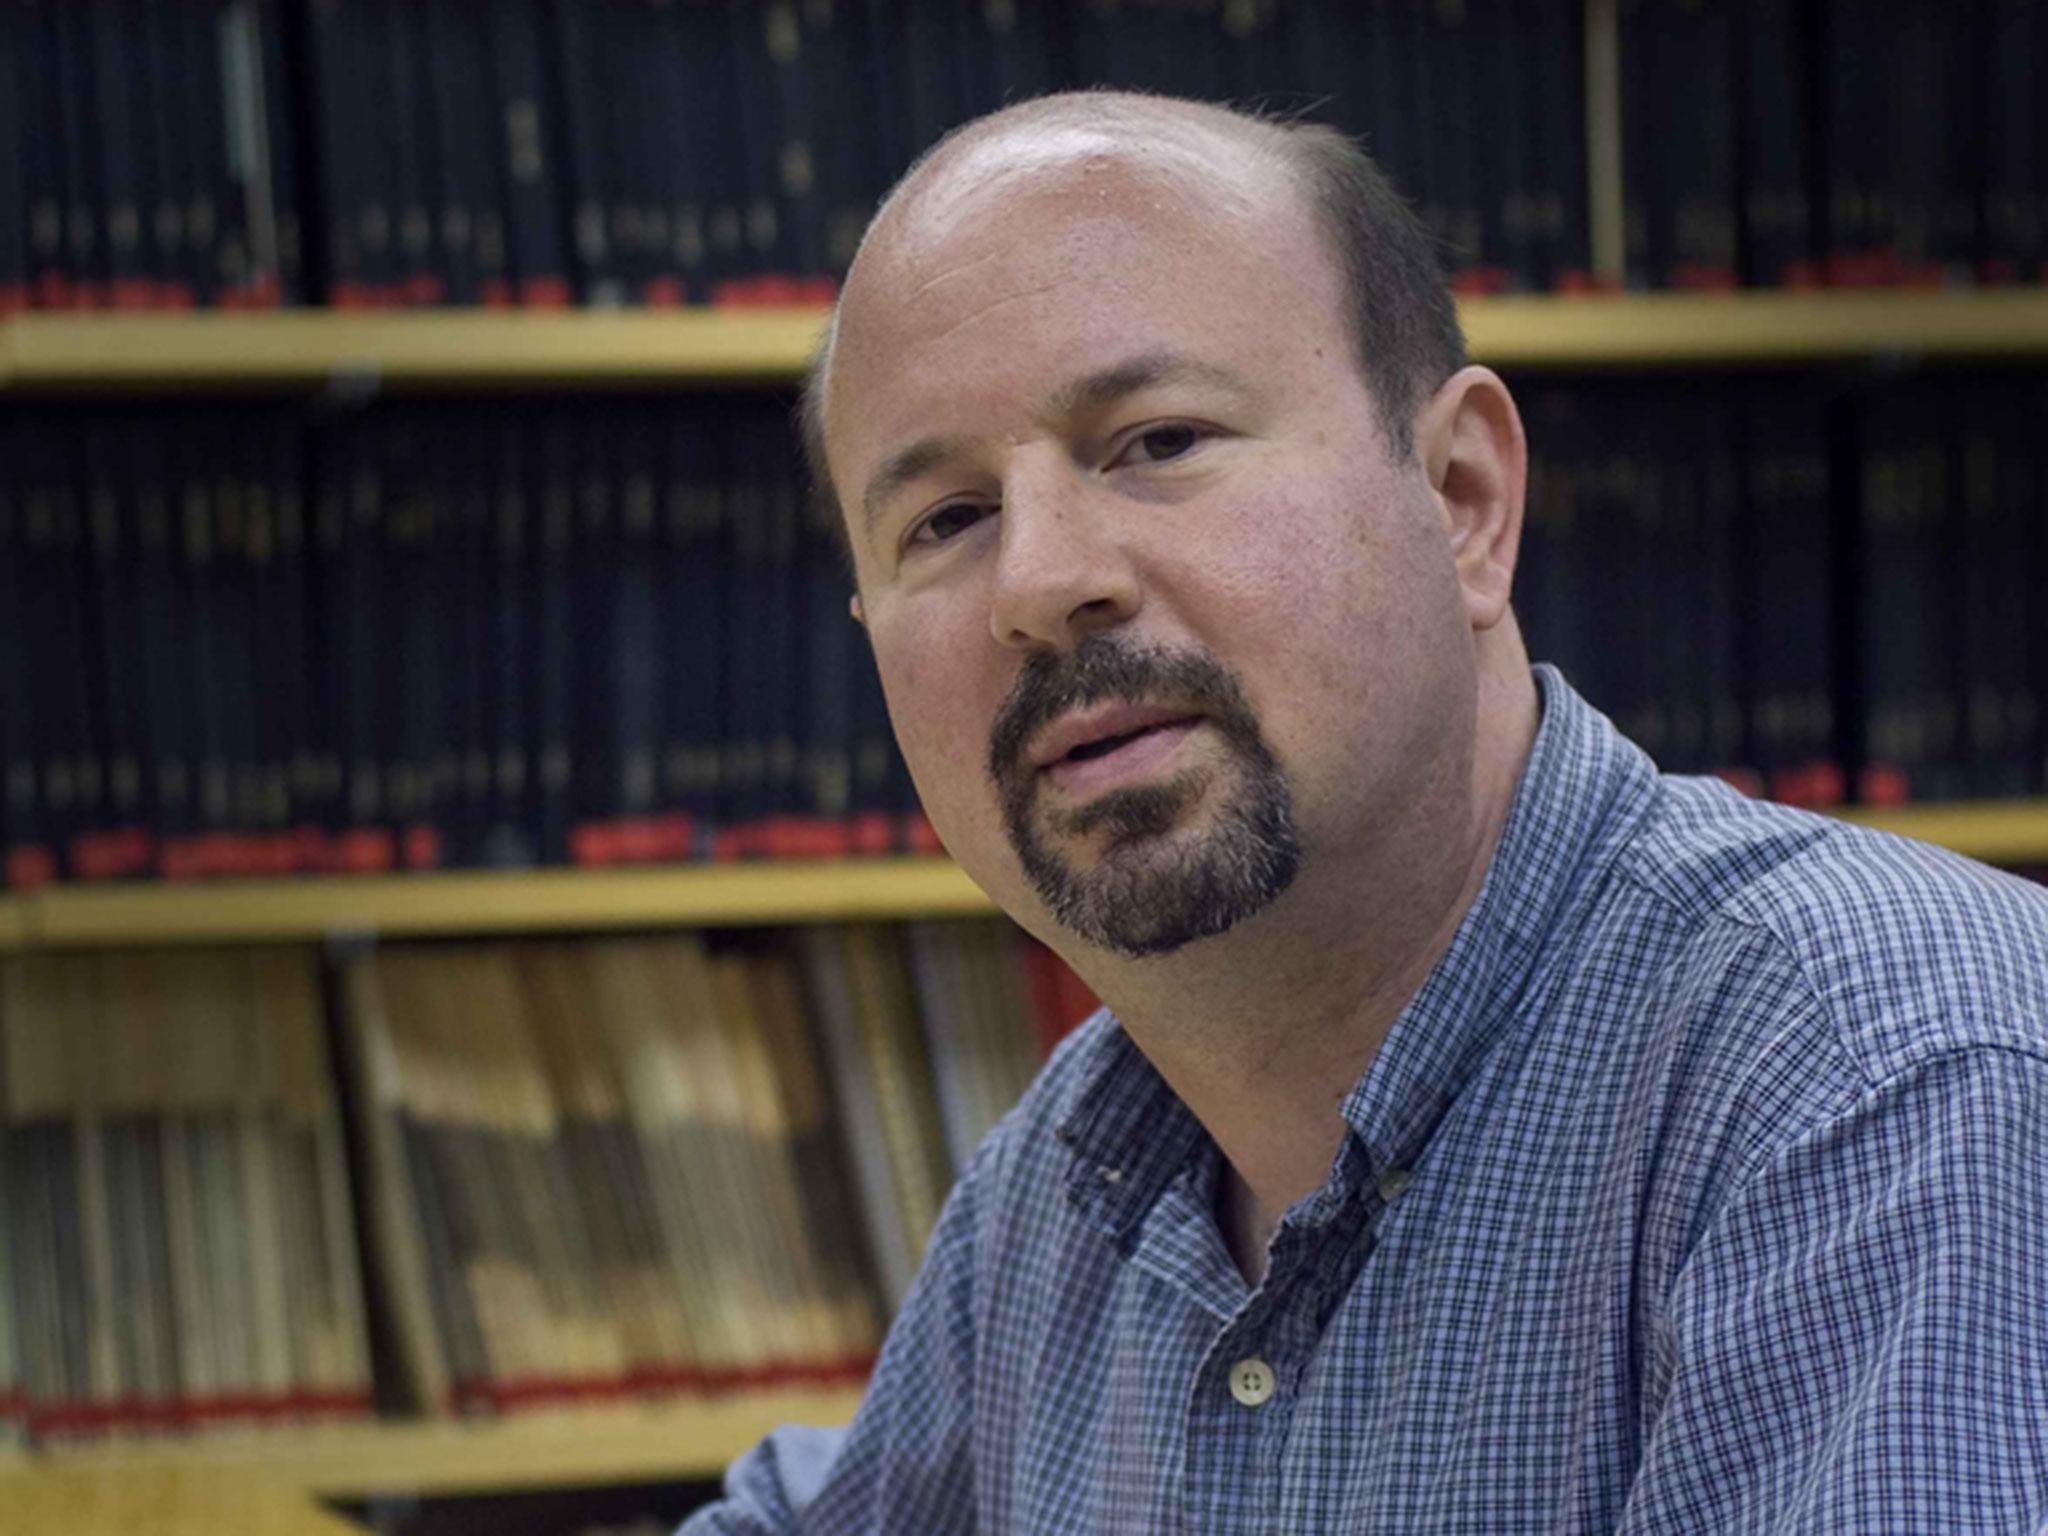 Professor Michael Mann says the US is ‘back in the madhouse’ over climate science denial